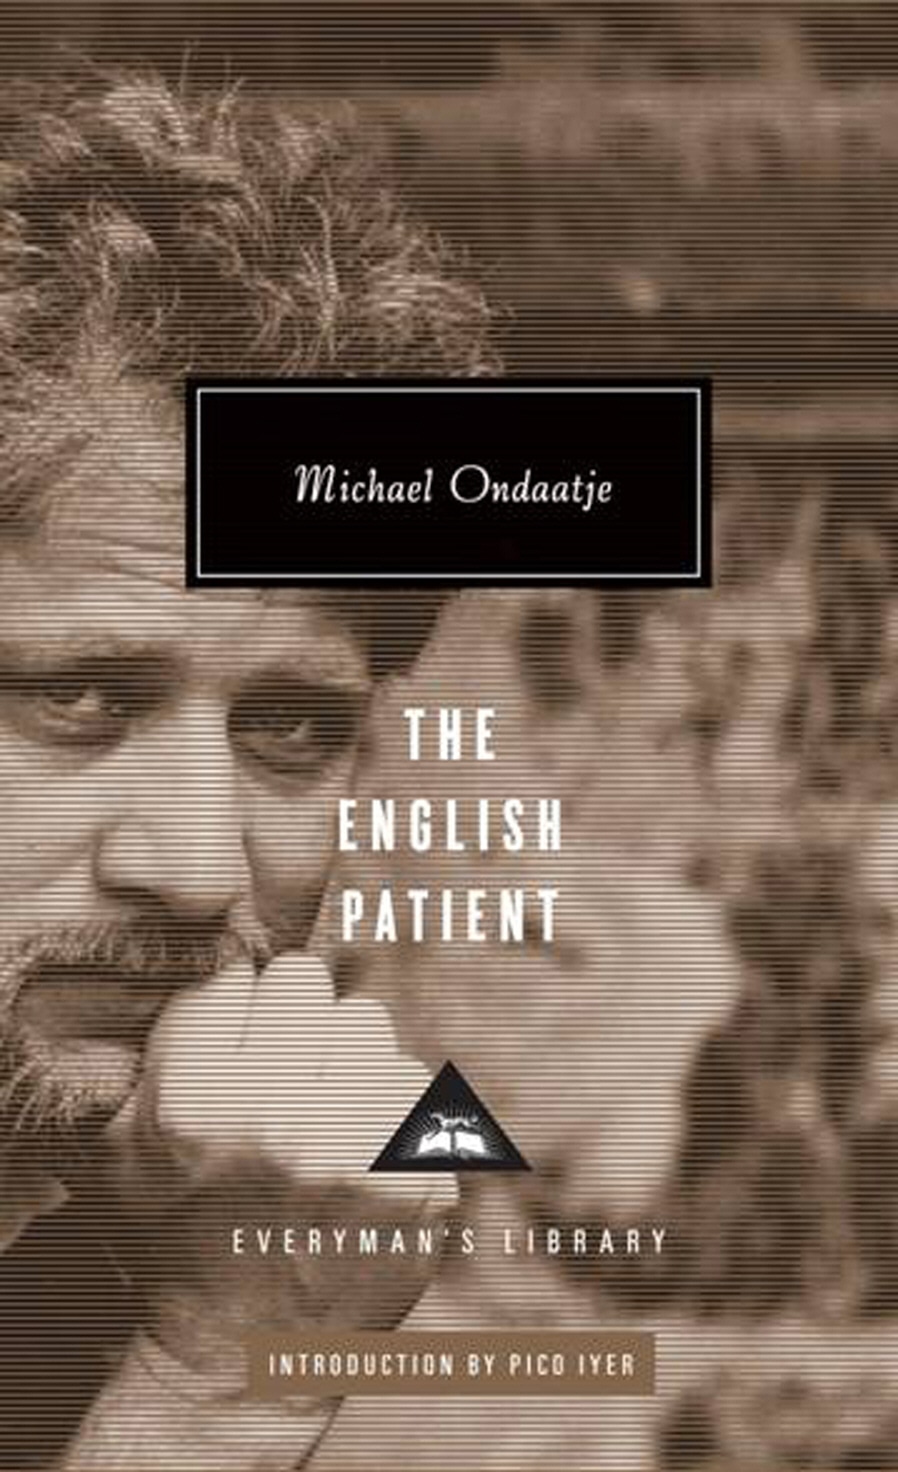 Book “The English Patient” by Michael Ondaatje